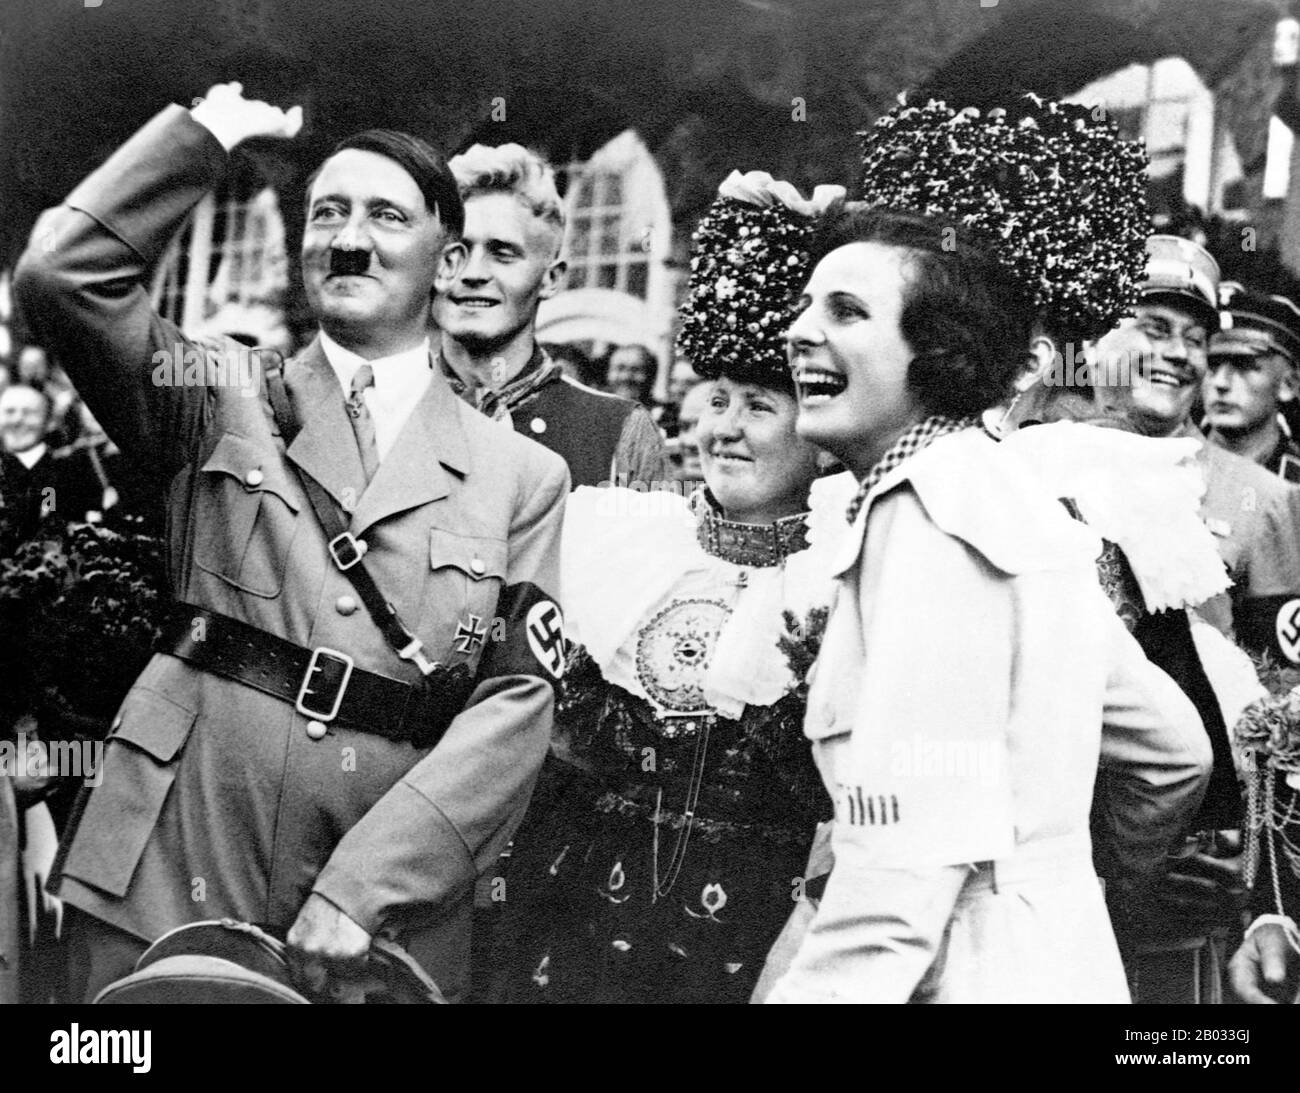 Helene Bertha Amalie 'Leni' Riefenstahl (22 August 1902 – 8 September 2003) was a German film director, producer, screenwriter, editor, photographer, actress, dancer, and propagandist for the Nazis.  Adolf Hitler (20 April 1889 – 30 April 1945) was a German politician of Austrian origin who was the leader of the Nazi Party (NSDAP), Chancellor of Germany from 1933 to 1945, and Fuhrer ('leader') of Nazi Germany from 1934 to 1945.  As dictator of Nazi Germany he initiated World War II in Europe and was a central figure of the Holocaust. Stock Photo